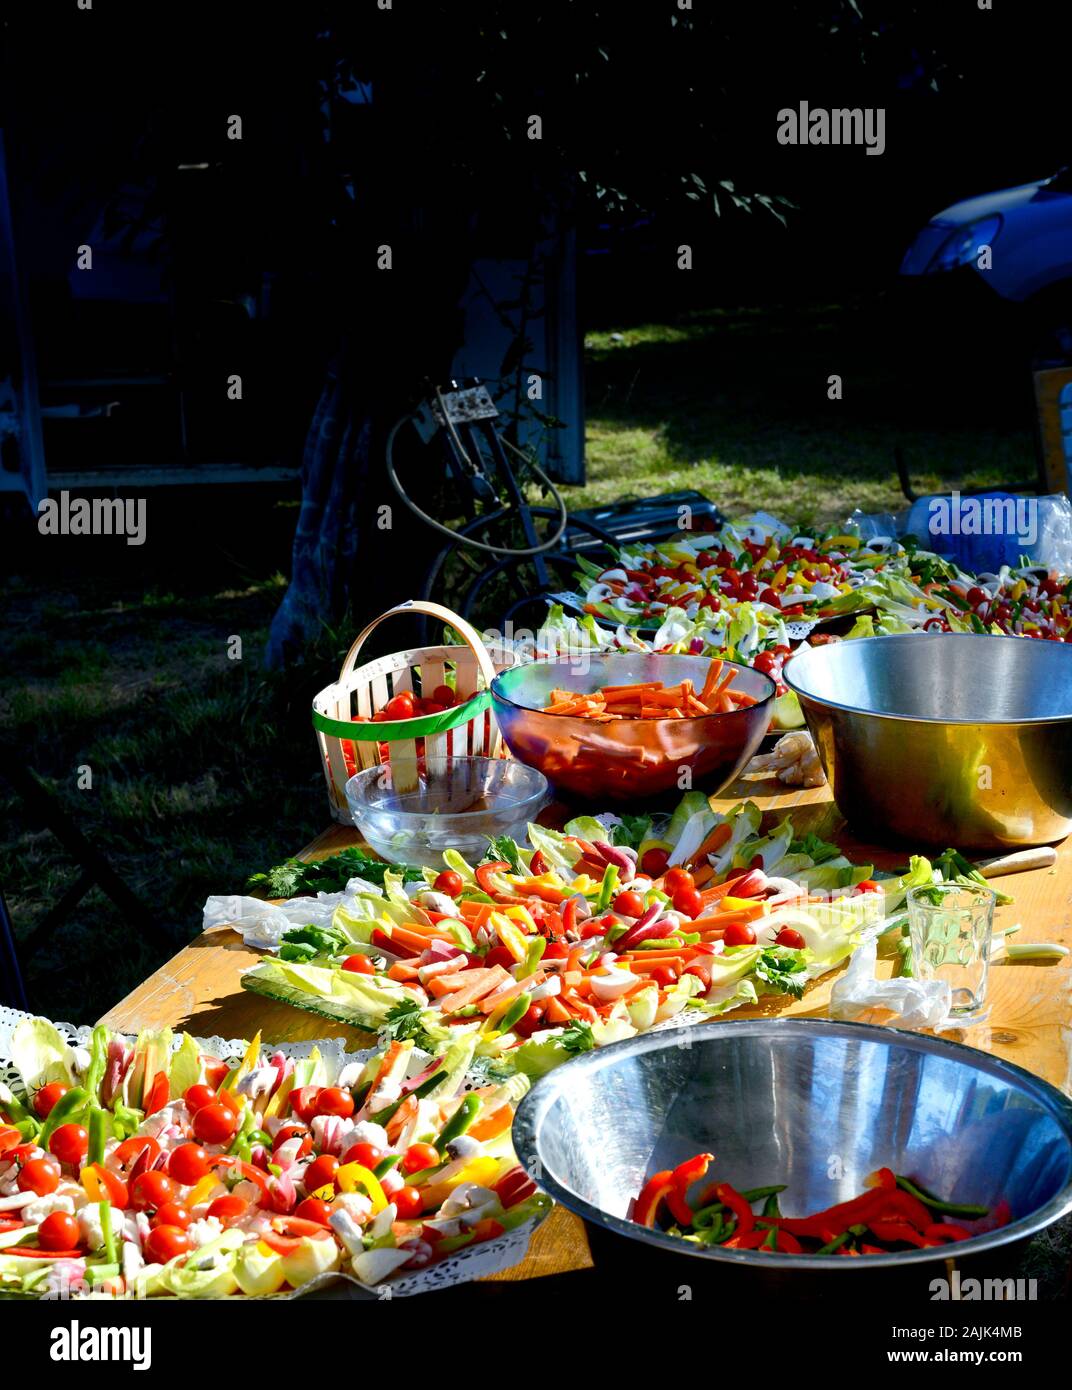 Table of salads ready for evening celebration Stock Photo